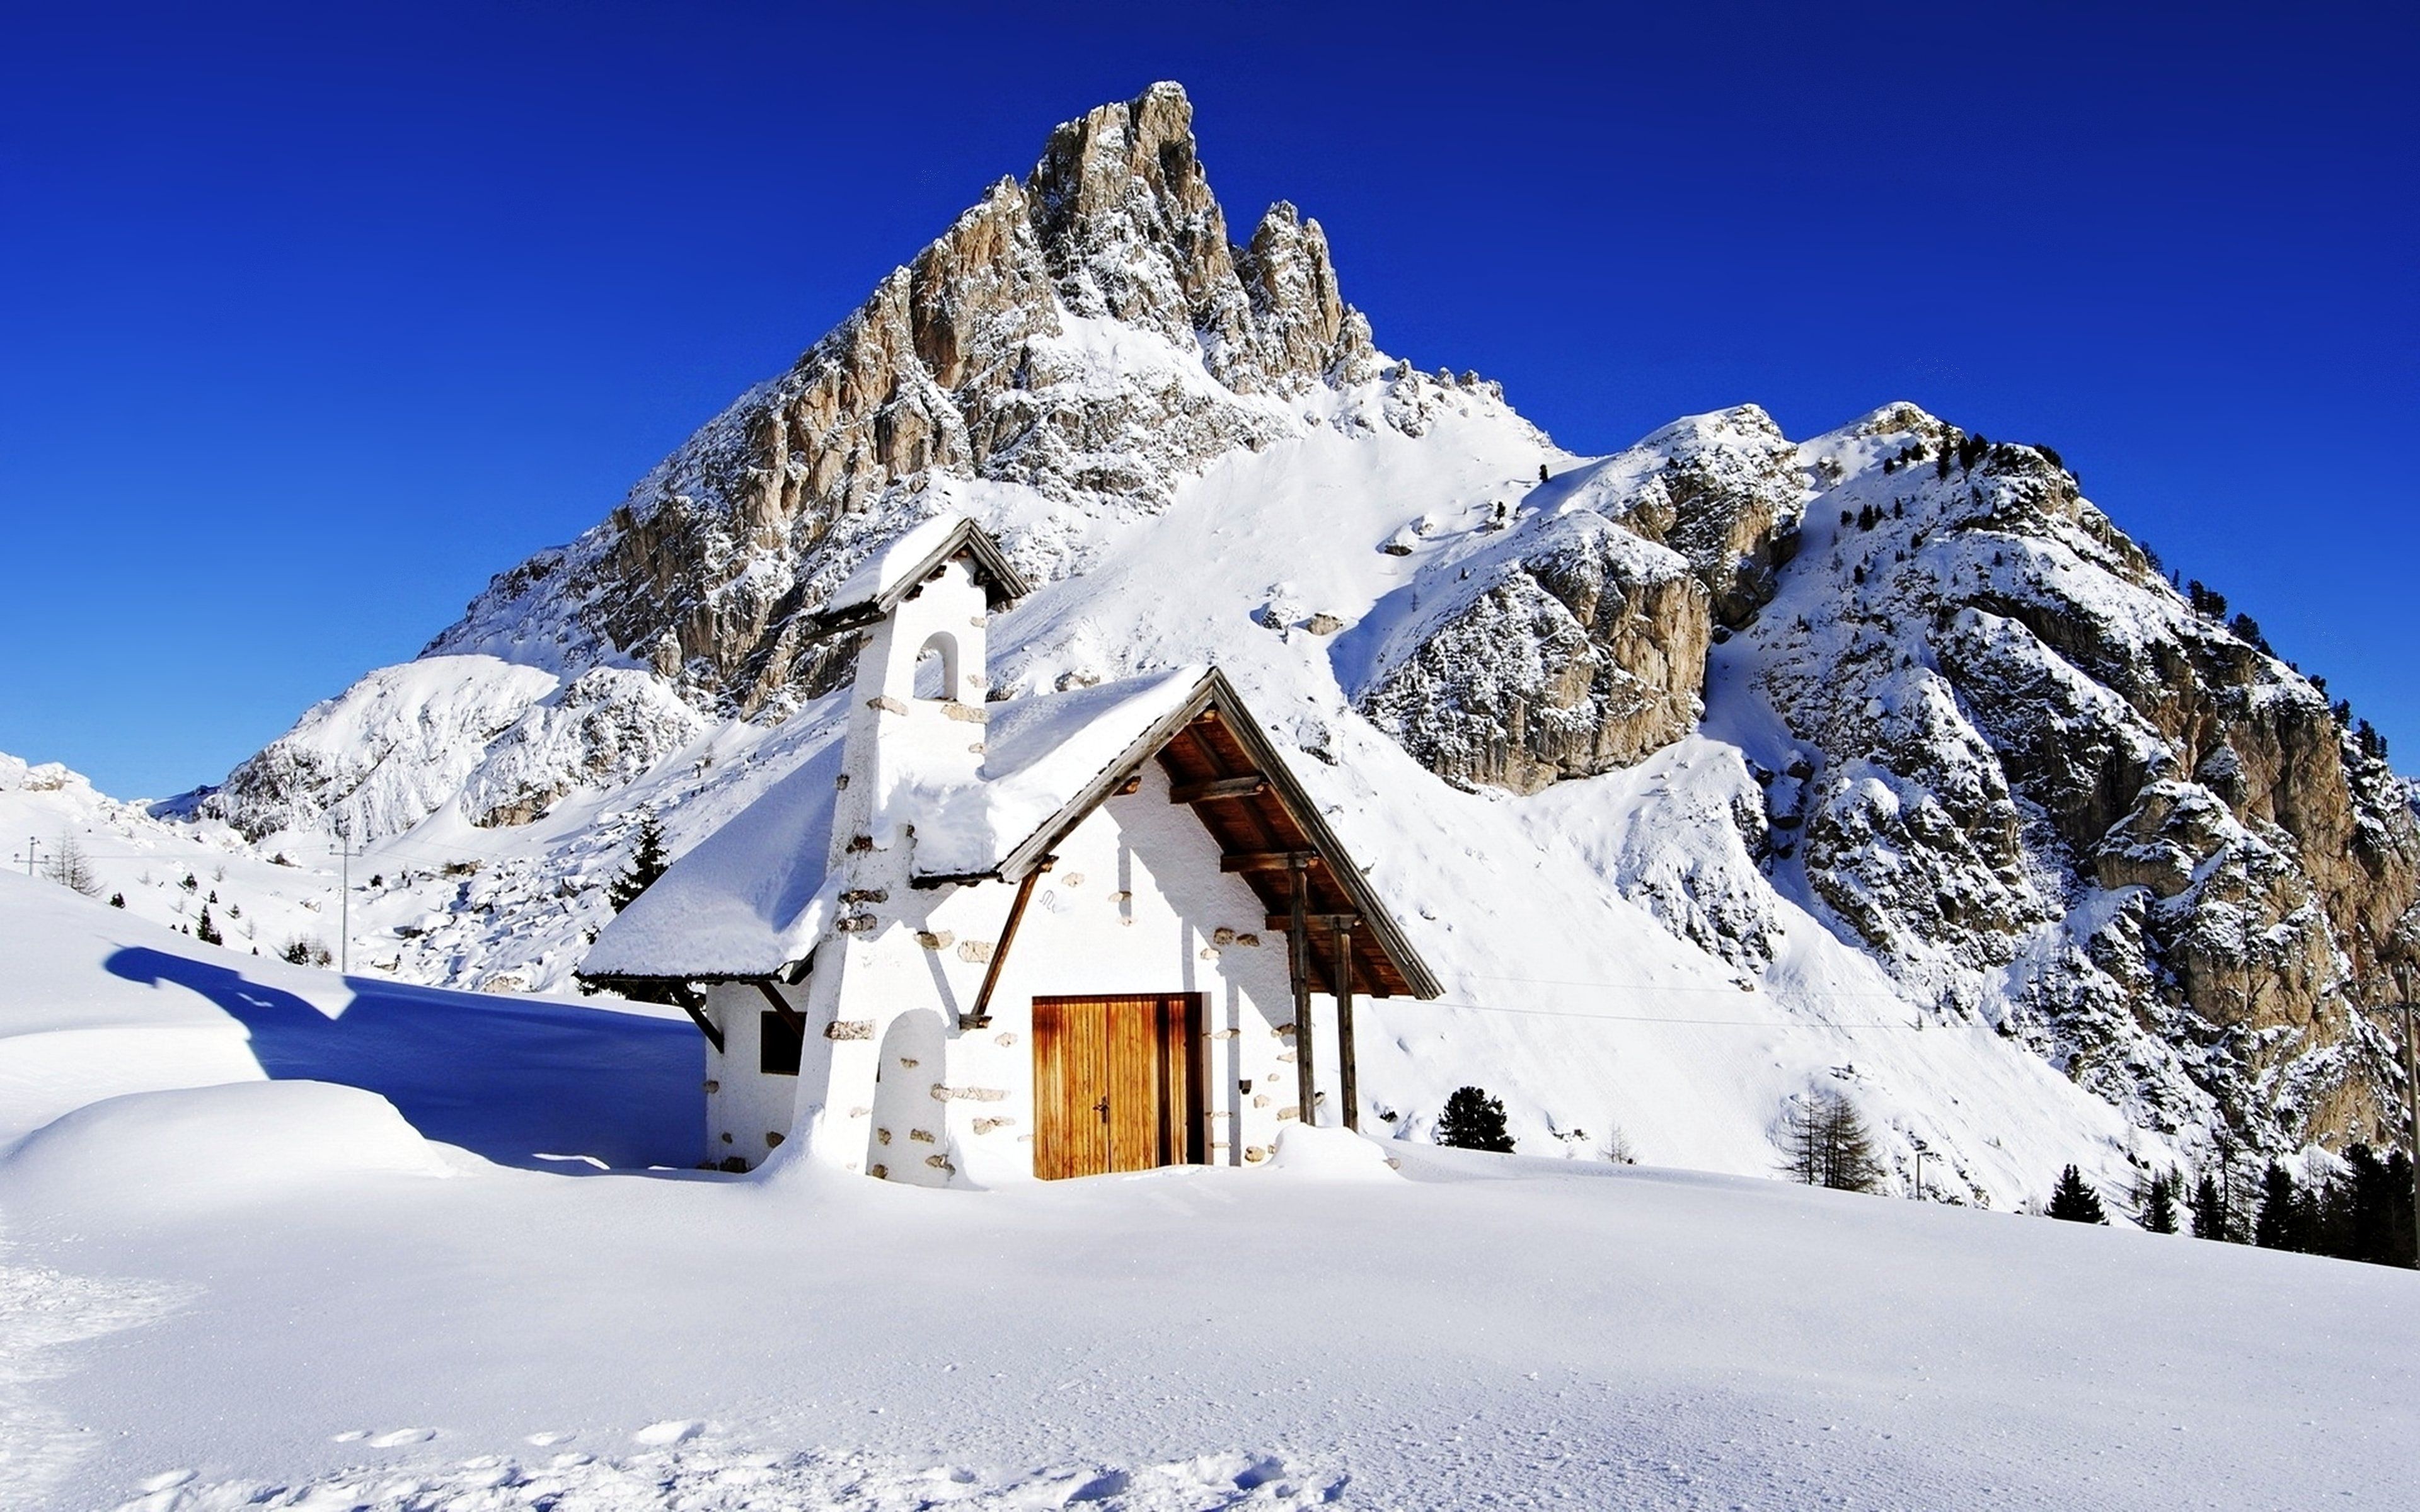 snow, Mountains, House, Sky, Blue, Sunny, Landscapes, Nature